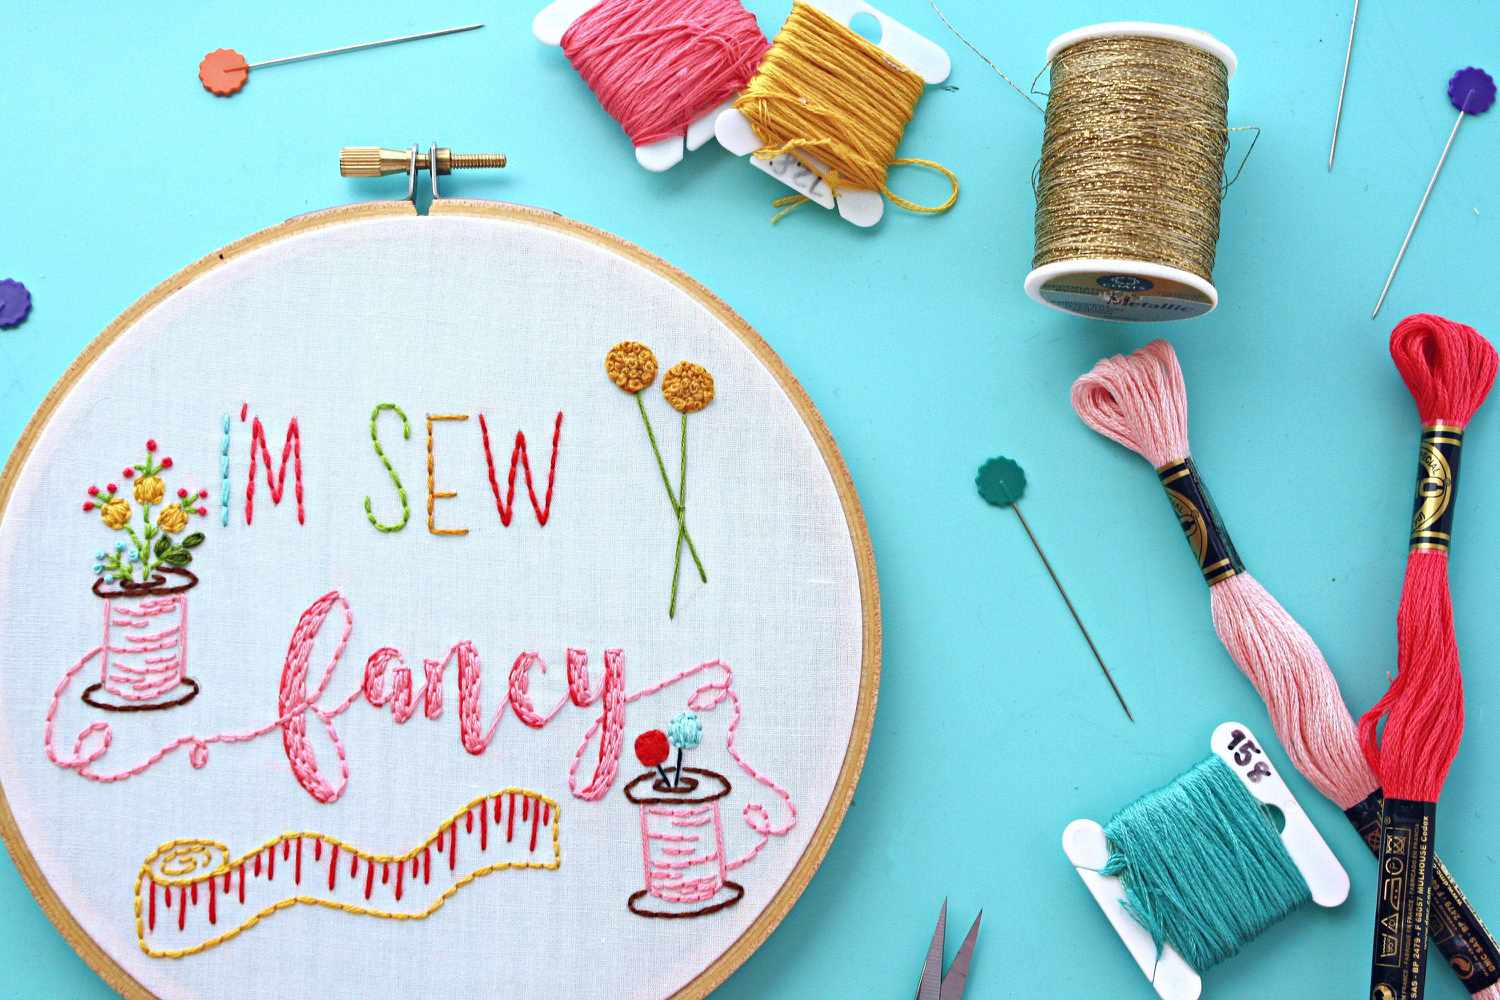 I'm Sew Fancy Hand Embroidery Pattern Close Up